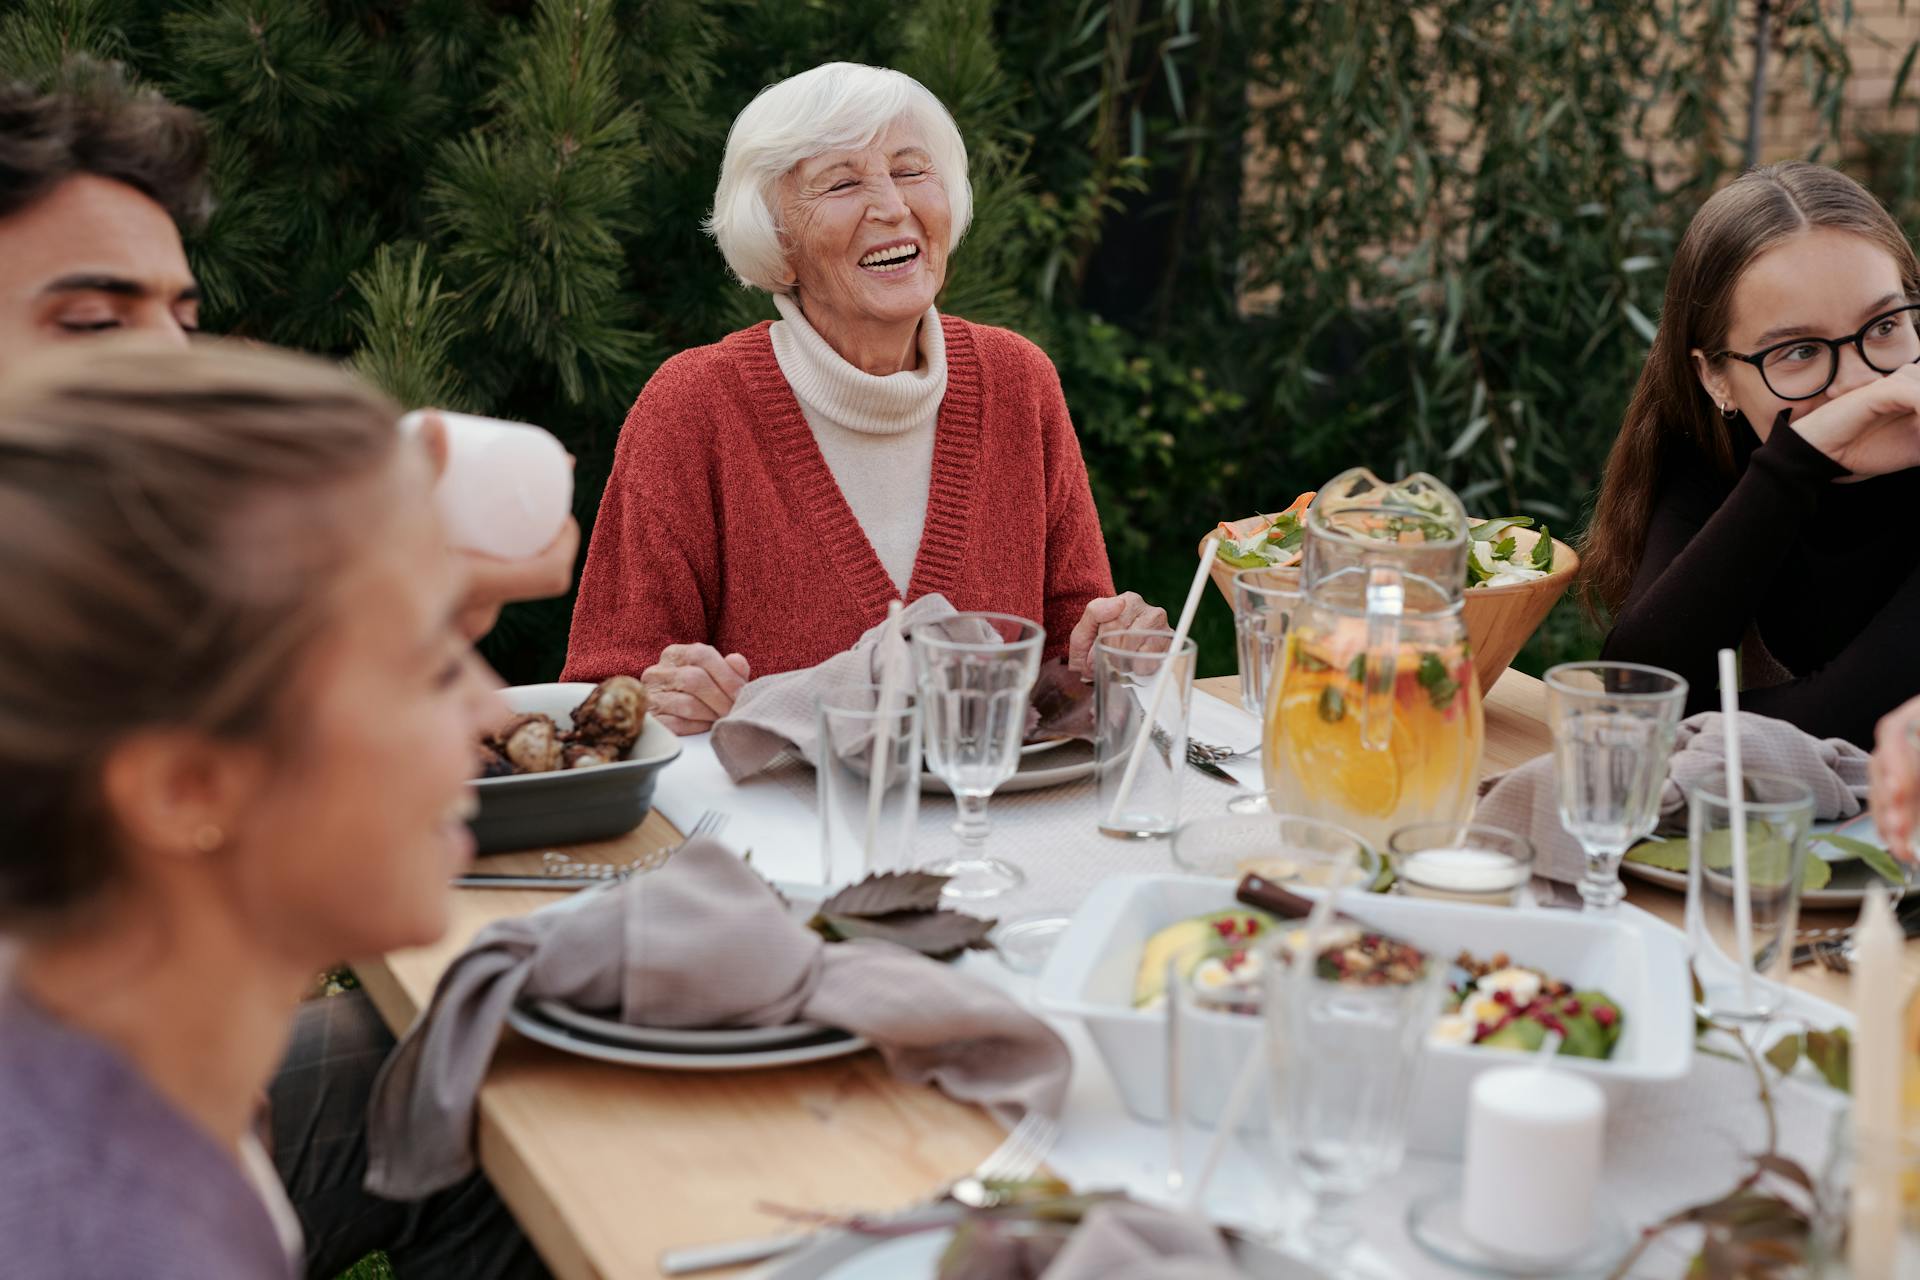 A senior woman laughing during a family gathering | Source: Pexels